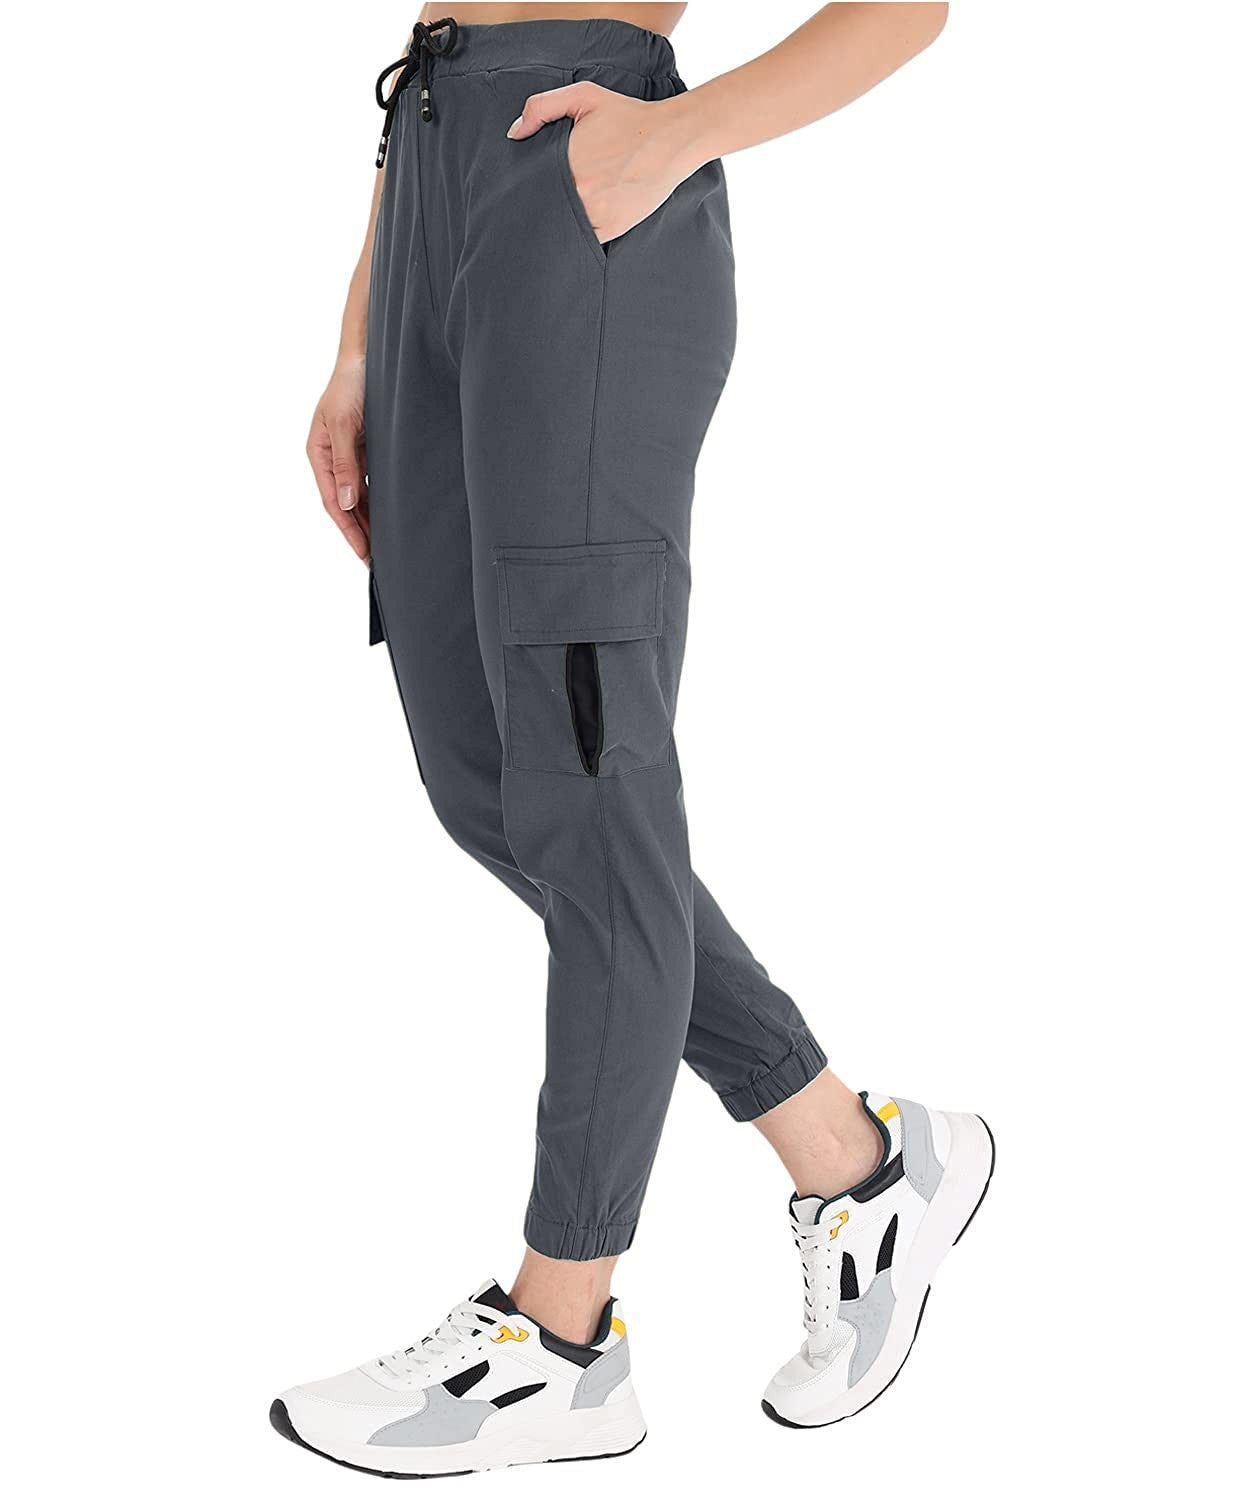 The model in the image is wearing Dark Grey Double Pocket Corgo Pant from Alice Milan. Crafted with the finest materials and impeccable attention to detail, the Cargo Pant looks premium, trendy, luxurious and offers unparalleled comfort. It’s a perfect clothing option for loungewear, resort wear, party wear or for an airport look. The woman in the image looks happy, and confident with her style statement putting a happy smile on her face.